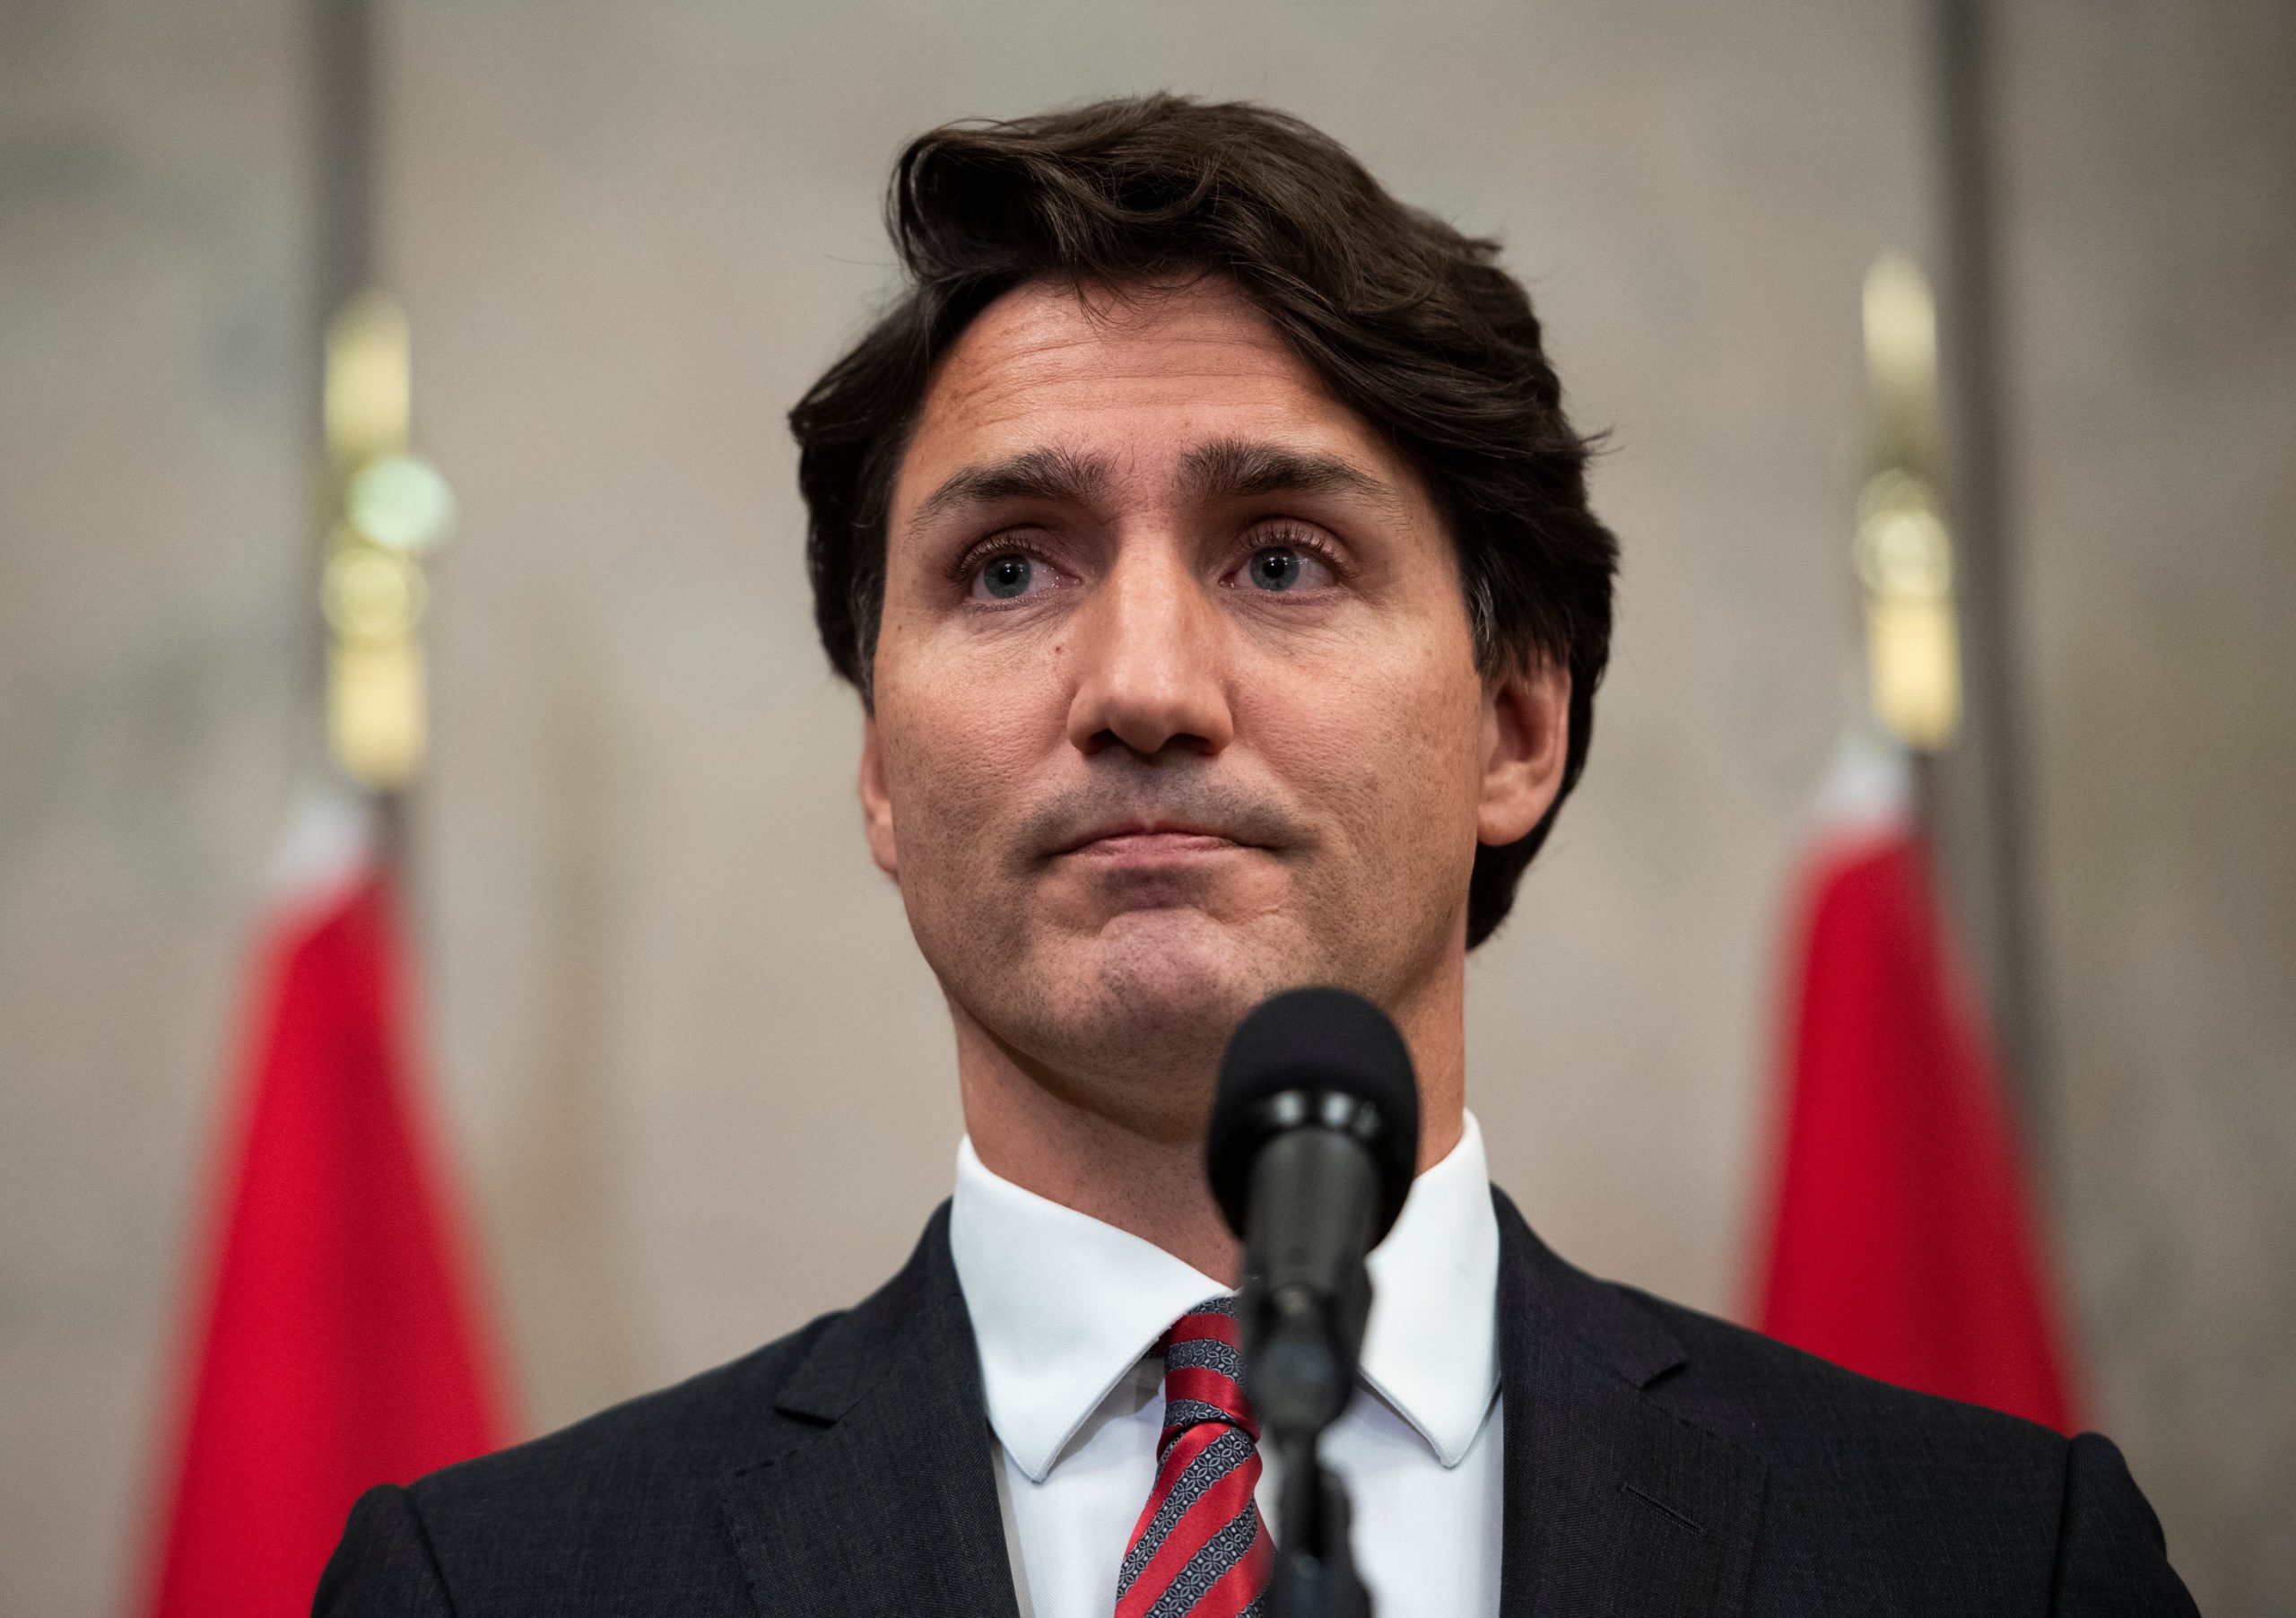 Justin Trudeau just used a super-long sexual identity acronym 2SLGBTQQIA+ – here’s what it means